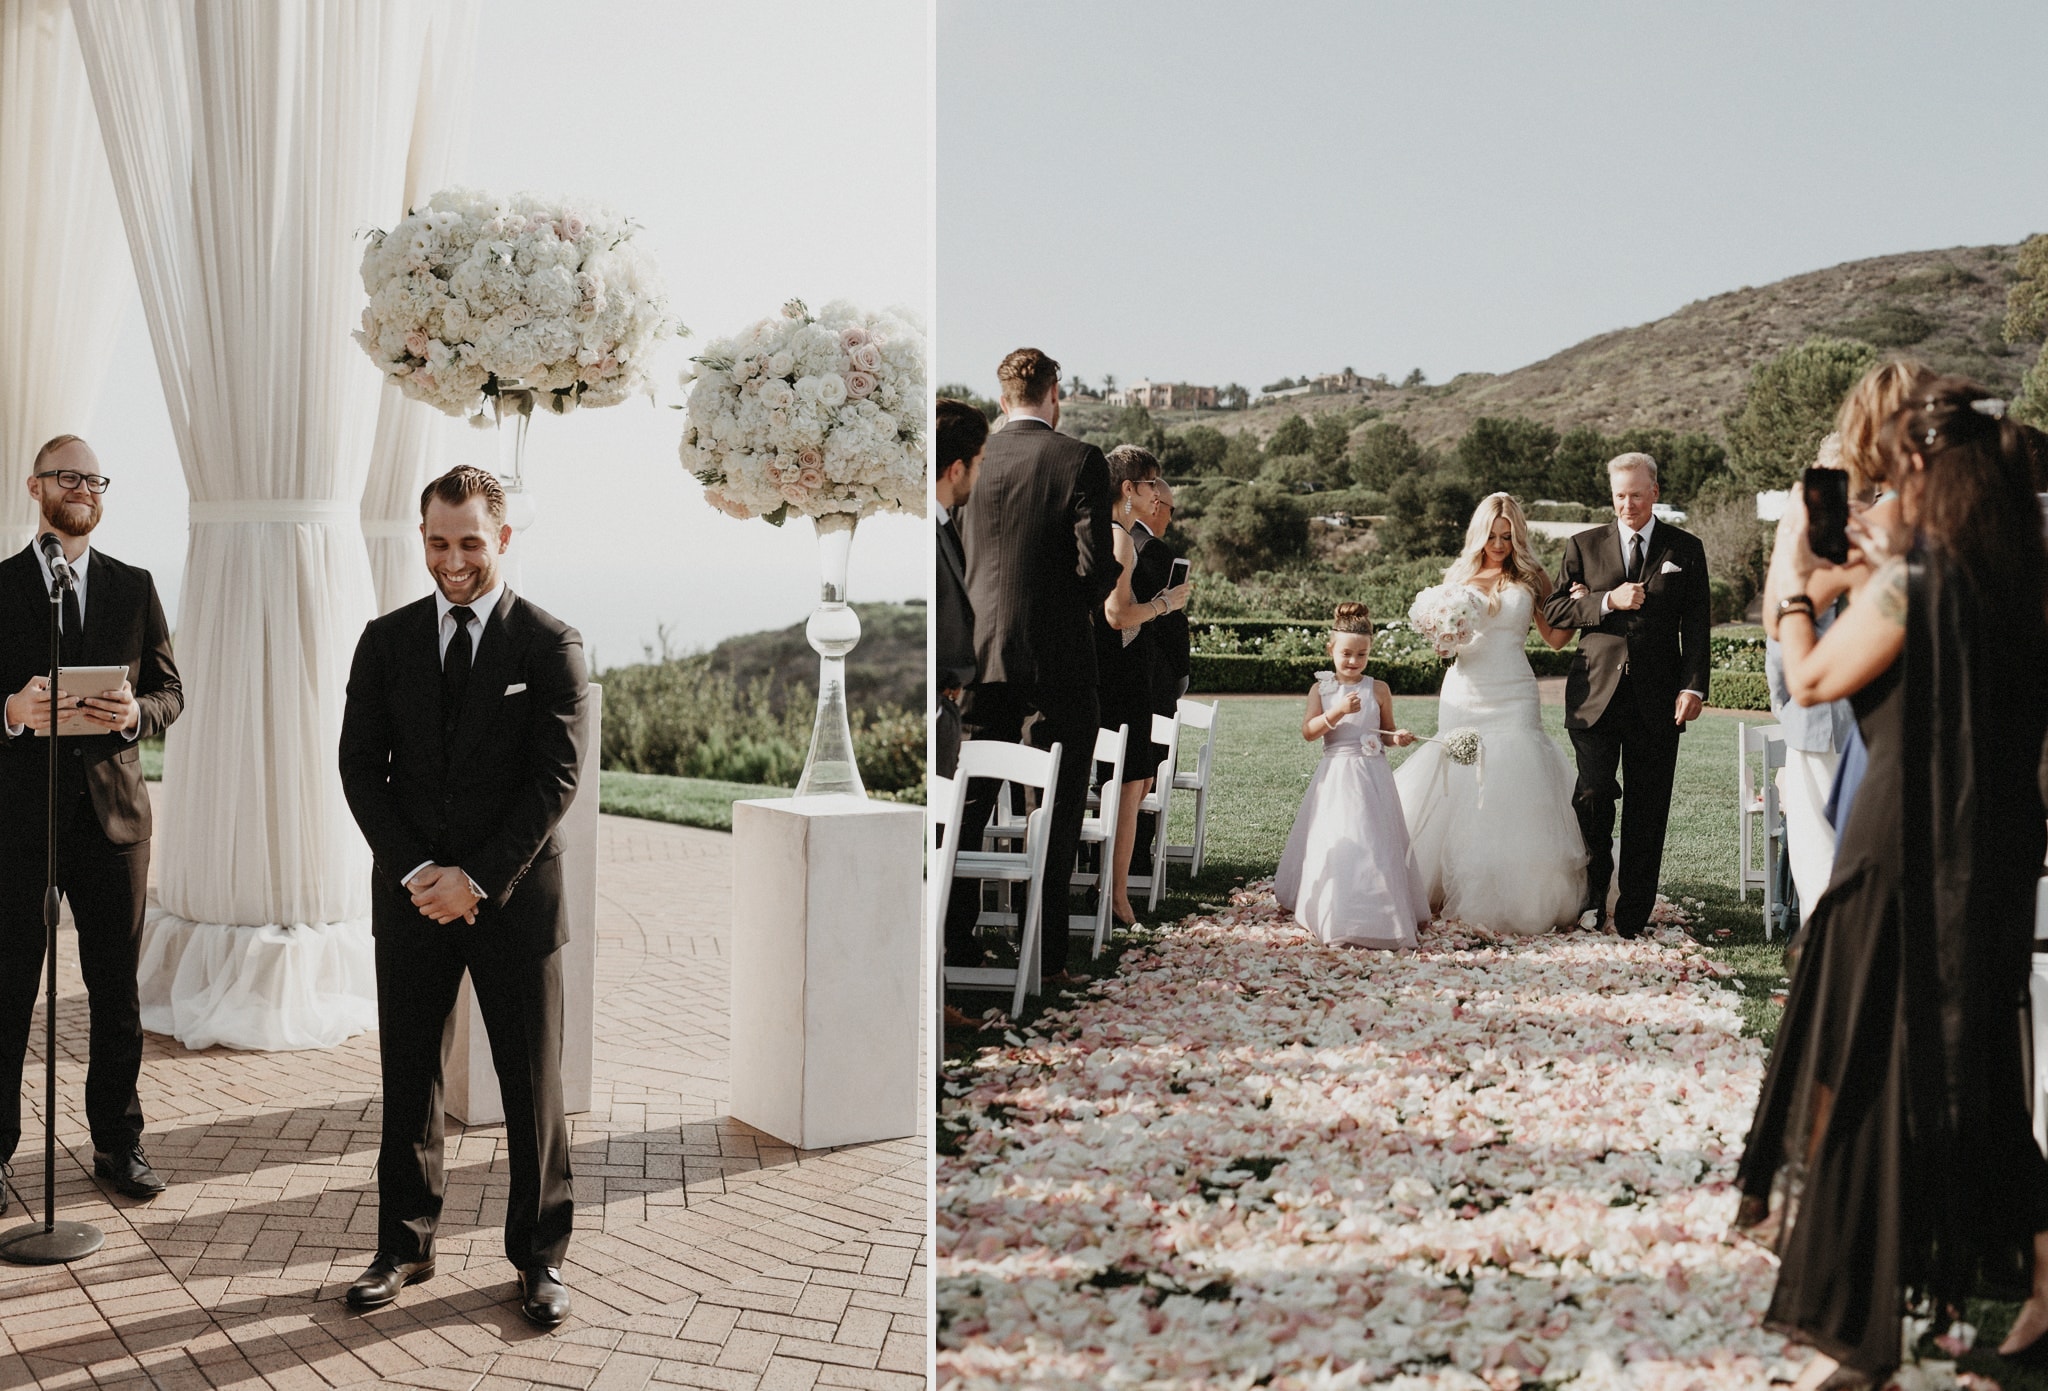 A handsome groom in a black suit smiles and looks down as he waits at the alter for his bride at an outdoor wedding in Orange County.